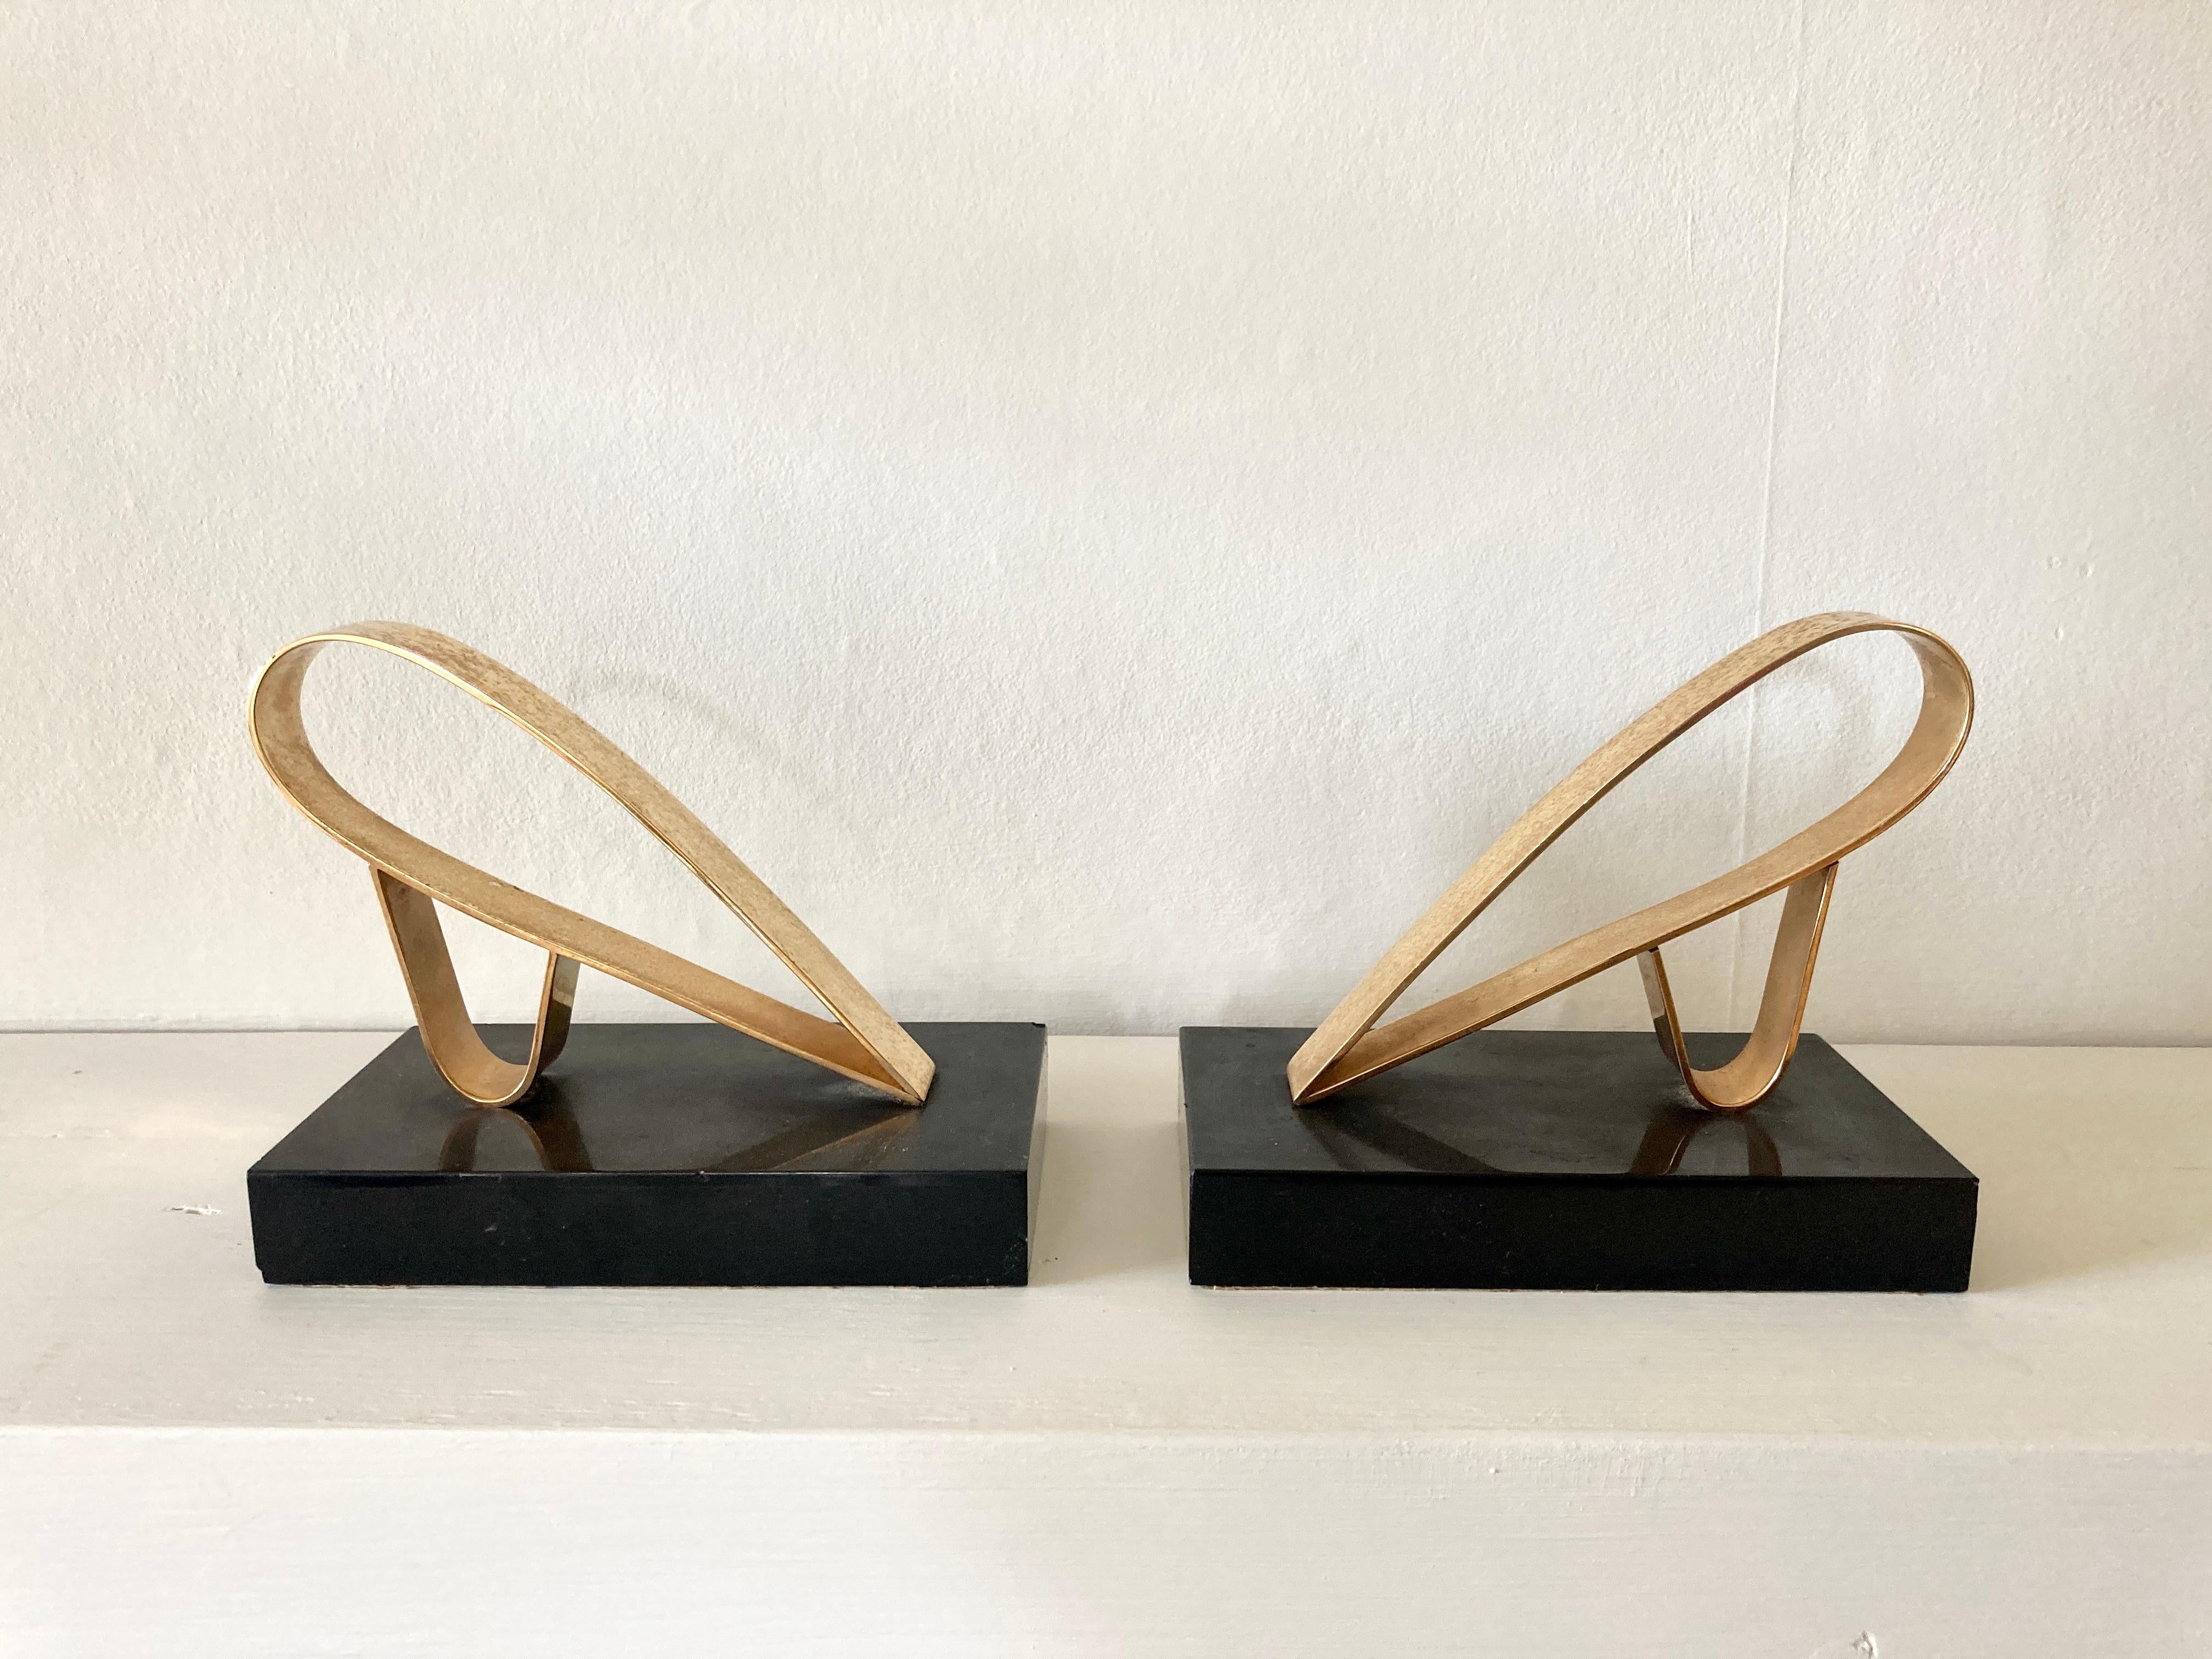 French Art Deco Modernist Bookends in Marble & Gold Plate by Gold Starry, France